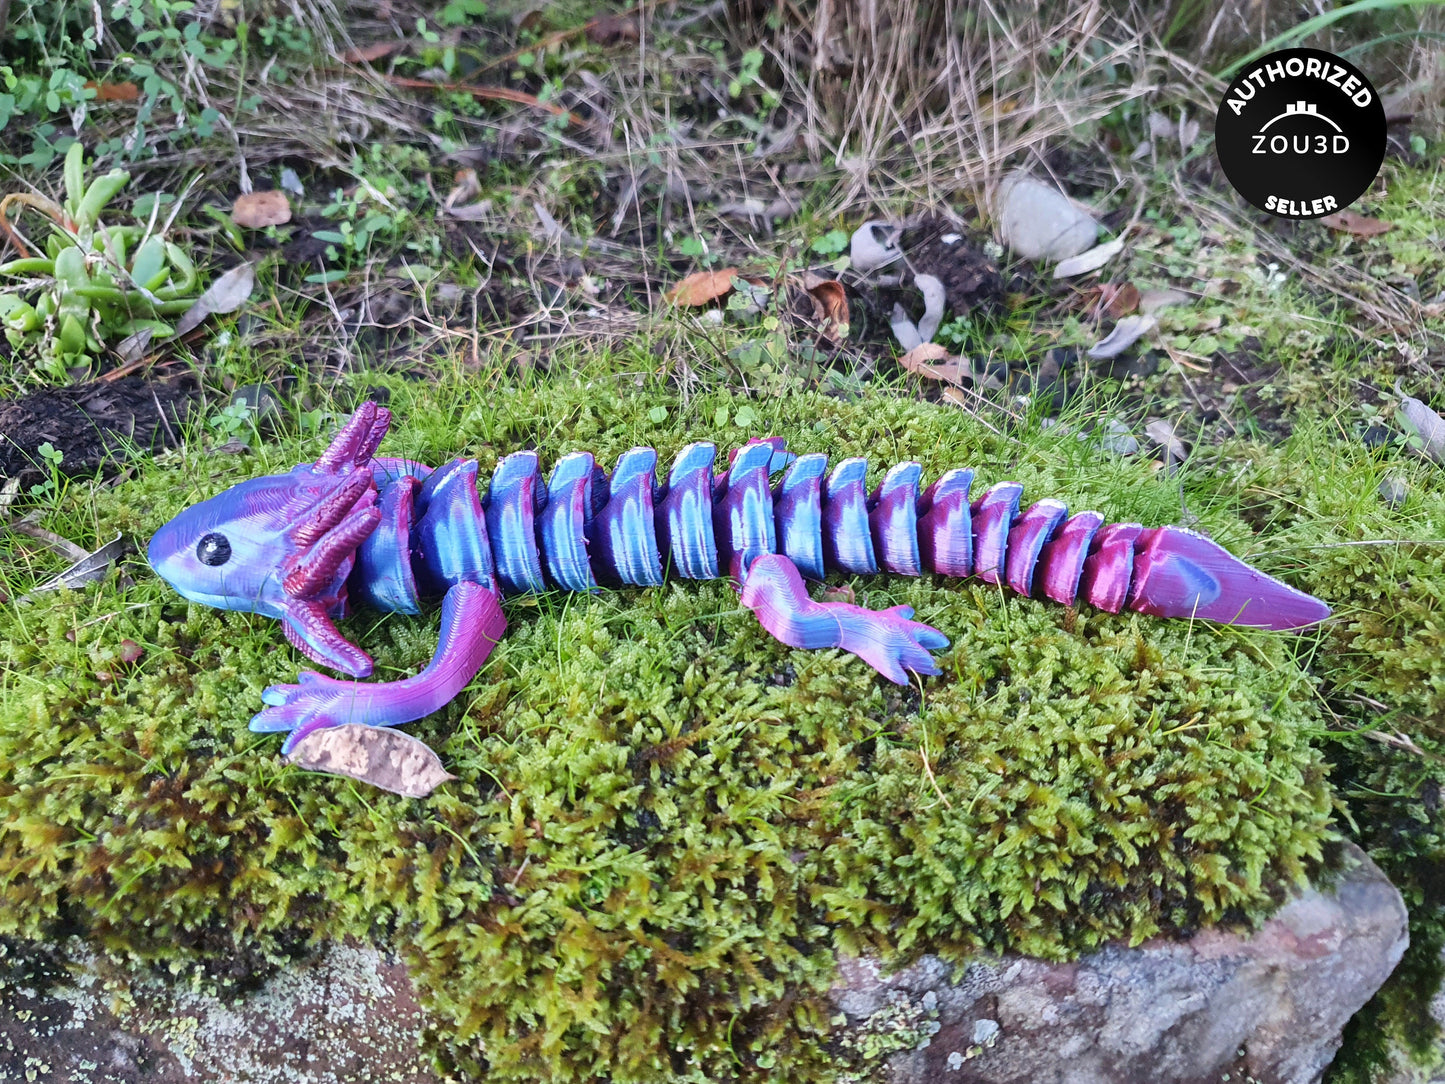 Cute Adult Axolotl - Articulated Flexible 3D Print. Professionally Hand painted finishing details